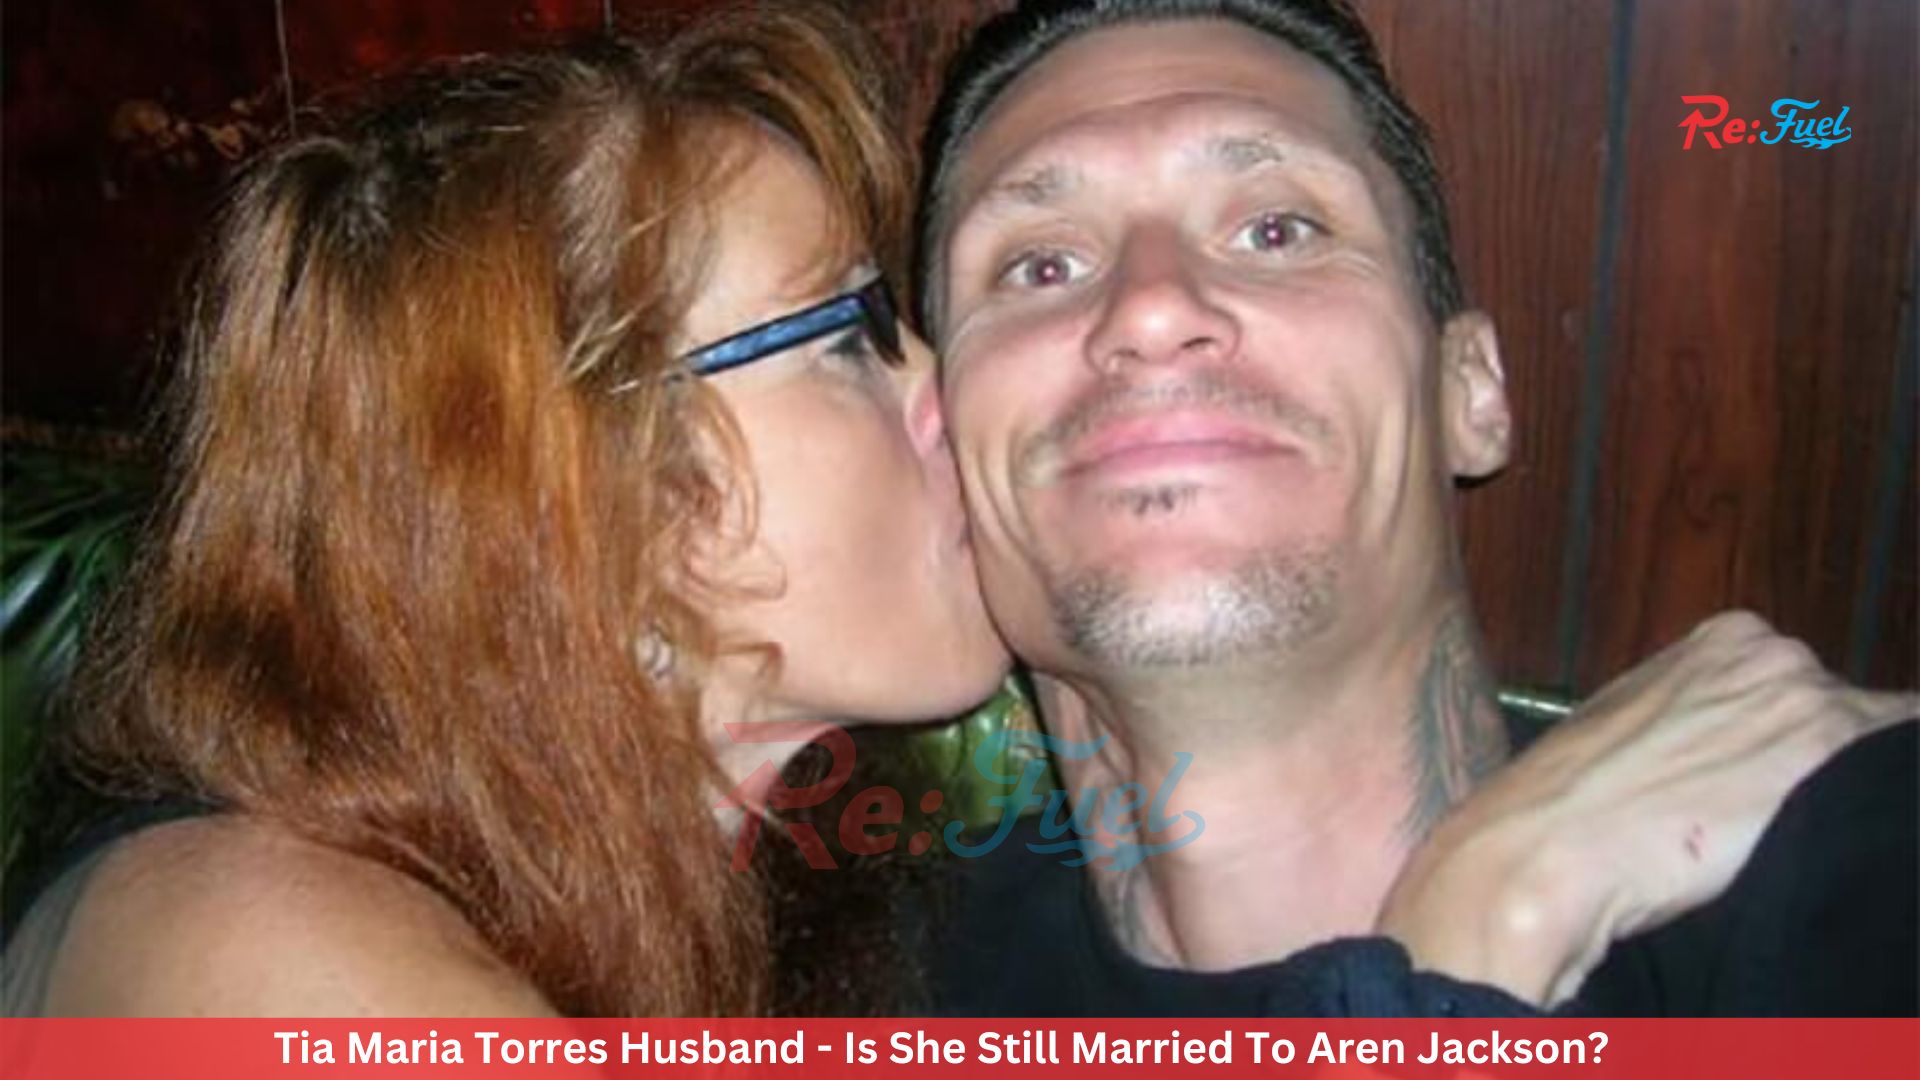 Tia Maria Torres Husband - Is She Still Married To Aren Jackson?